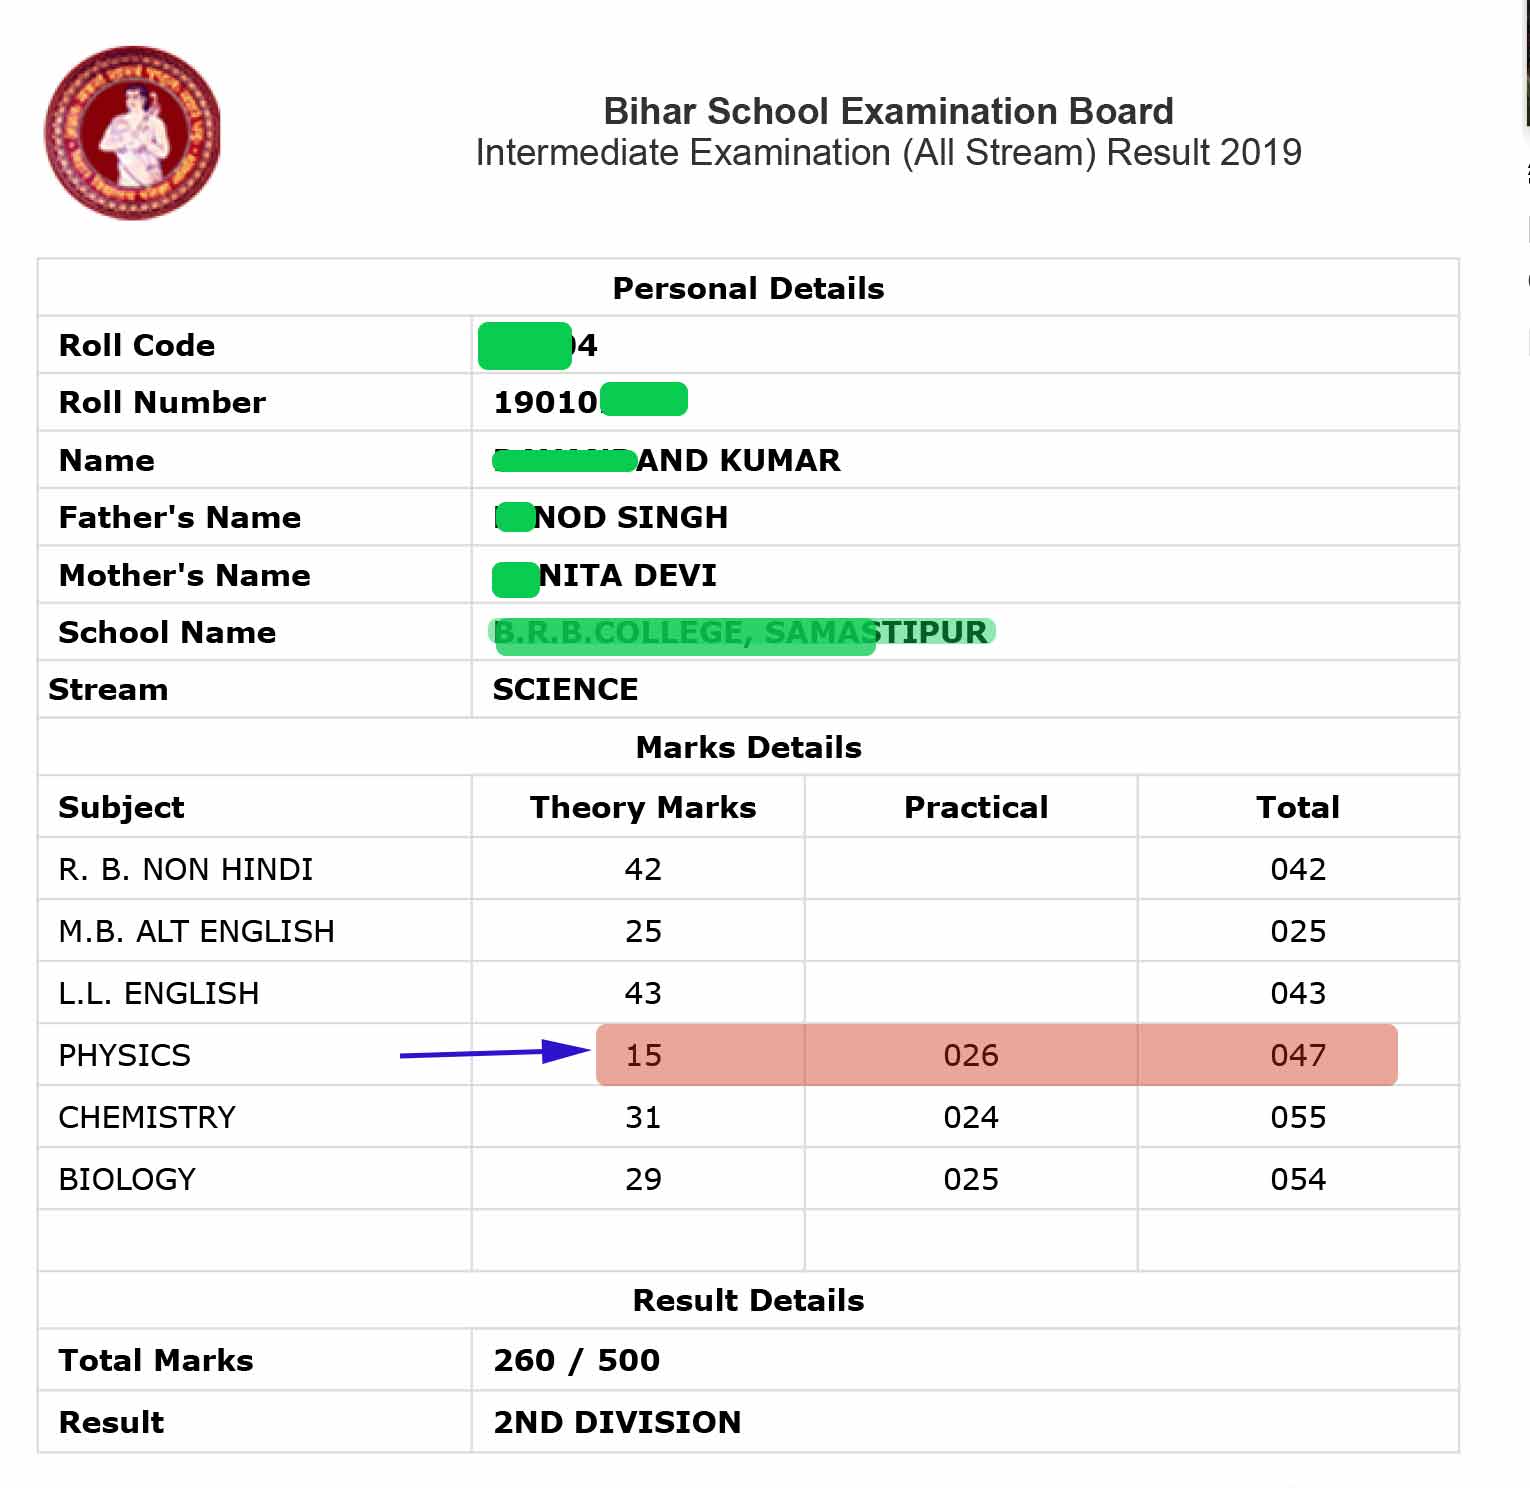 http://indiaresults.com, Steps to check BSEB Exam Result 2019, BSEB 12th Science Result 2019 , BSEB 12th Exam 2019 Result Today Check , BSEB 2019, BSEB science, Science result, result science bihar, bihar science results,